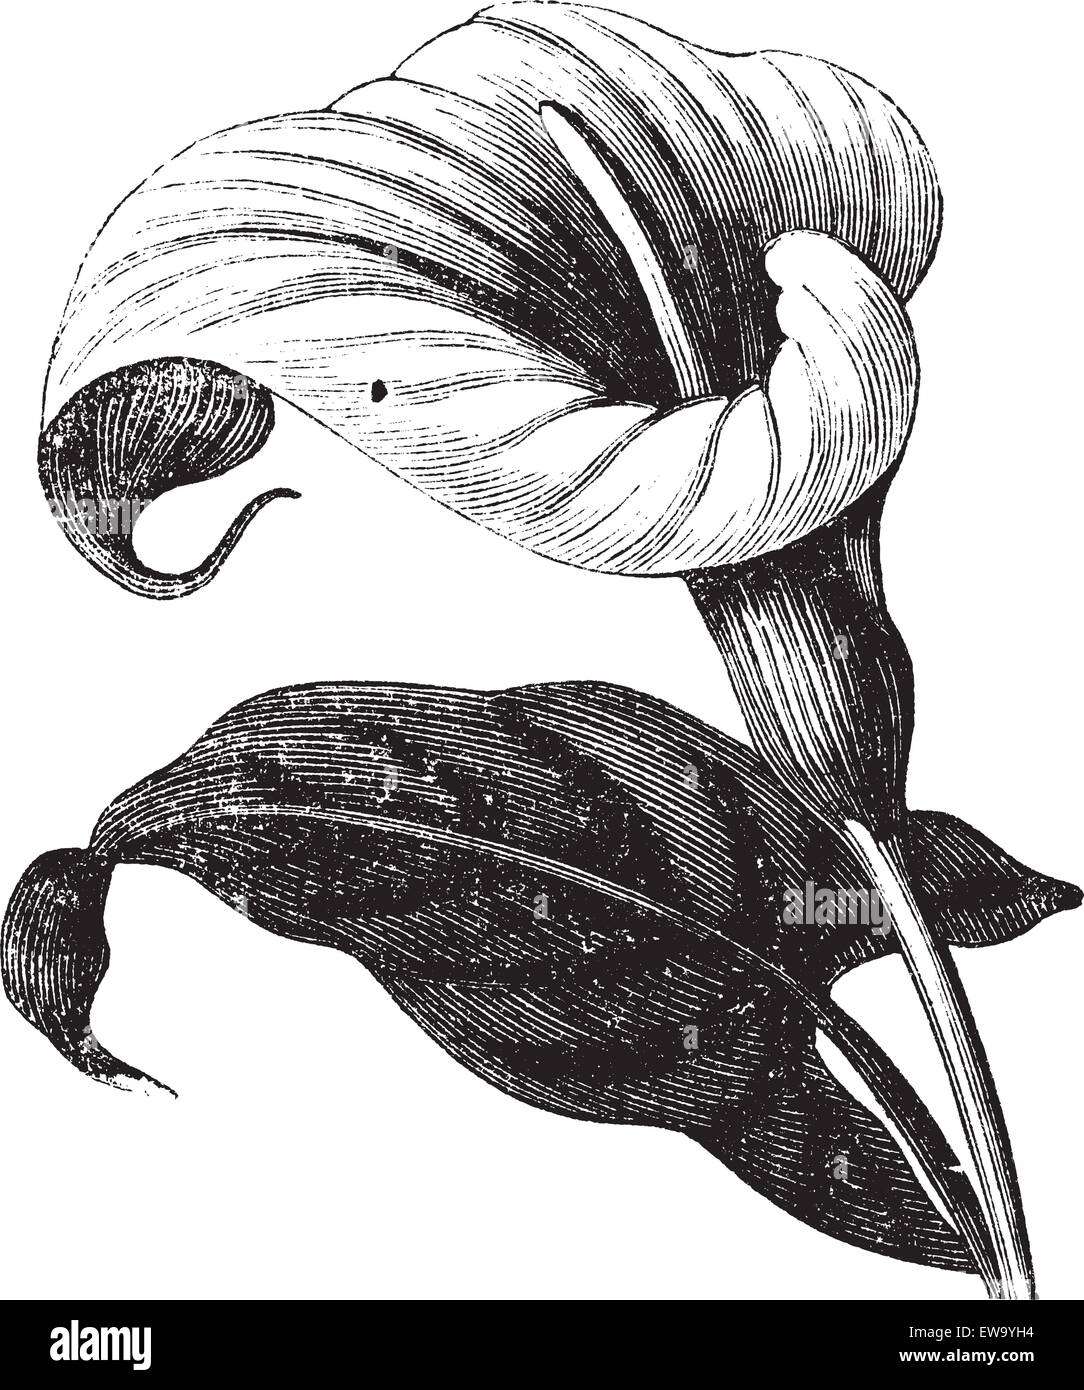 Zantedeschia aethiopica also known as Richardia Africana, flower, vintage engraved illustration of Zantedeschia aethiopica, flower, isolated against a white background. Stock Vector